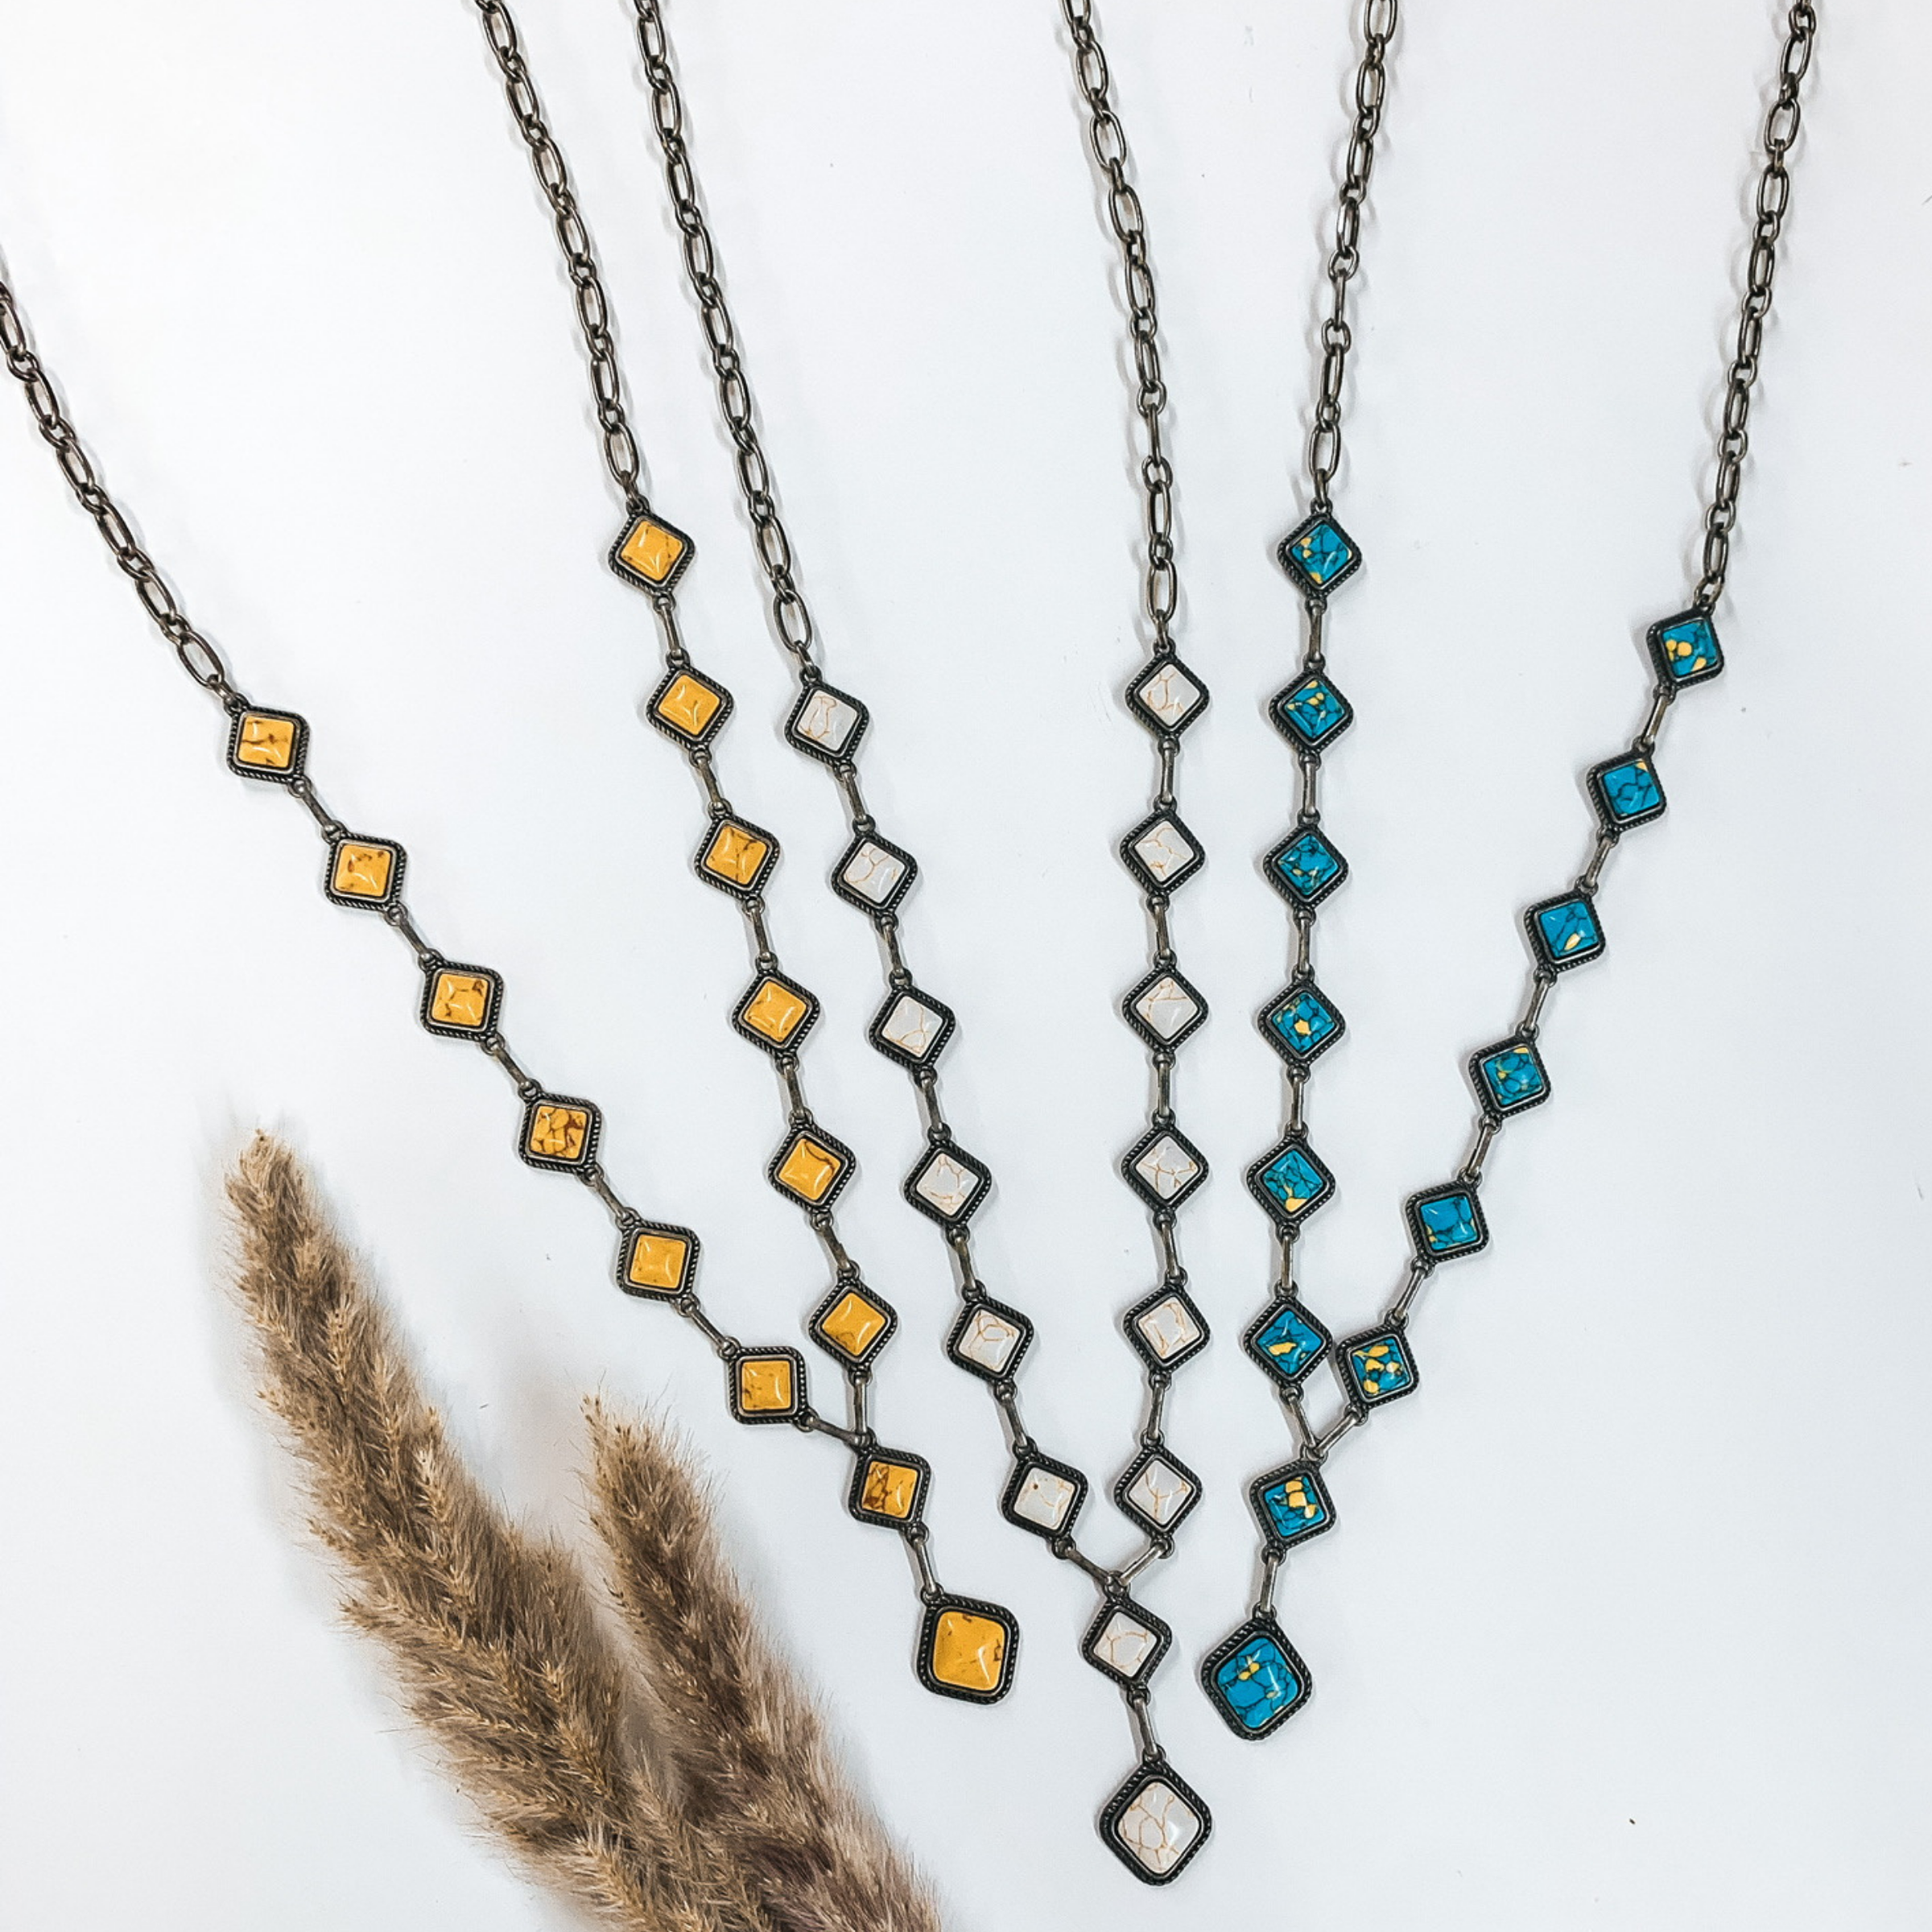 Silver Chain Necklace with Turquoise Square Stones - Giddy Up Glamour Boutique